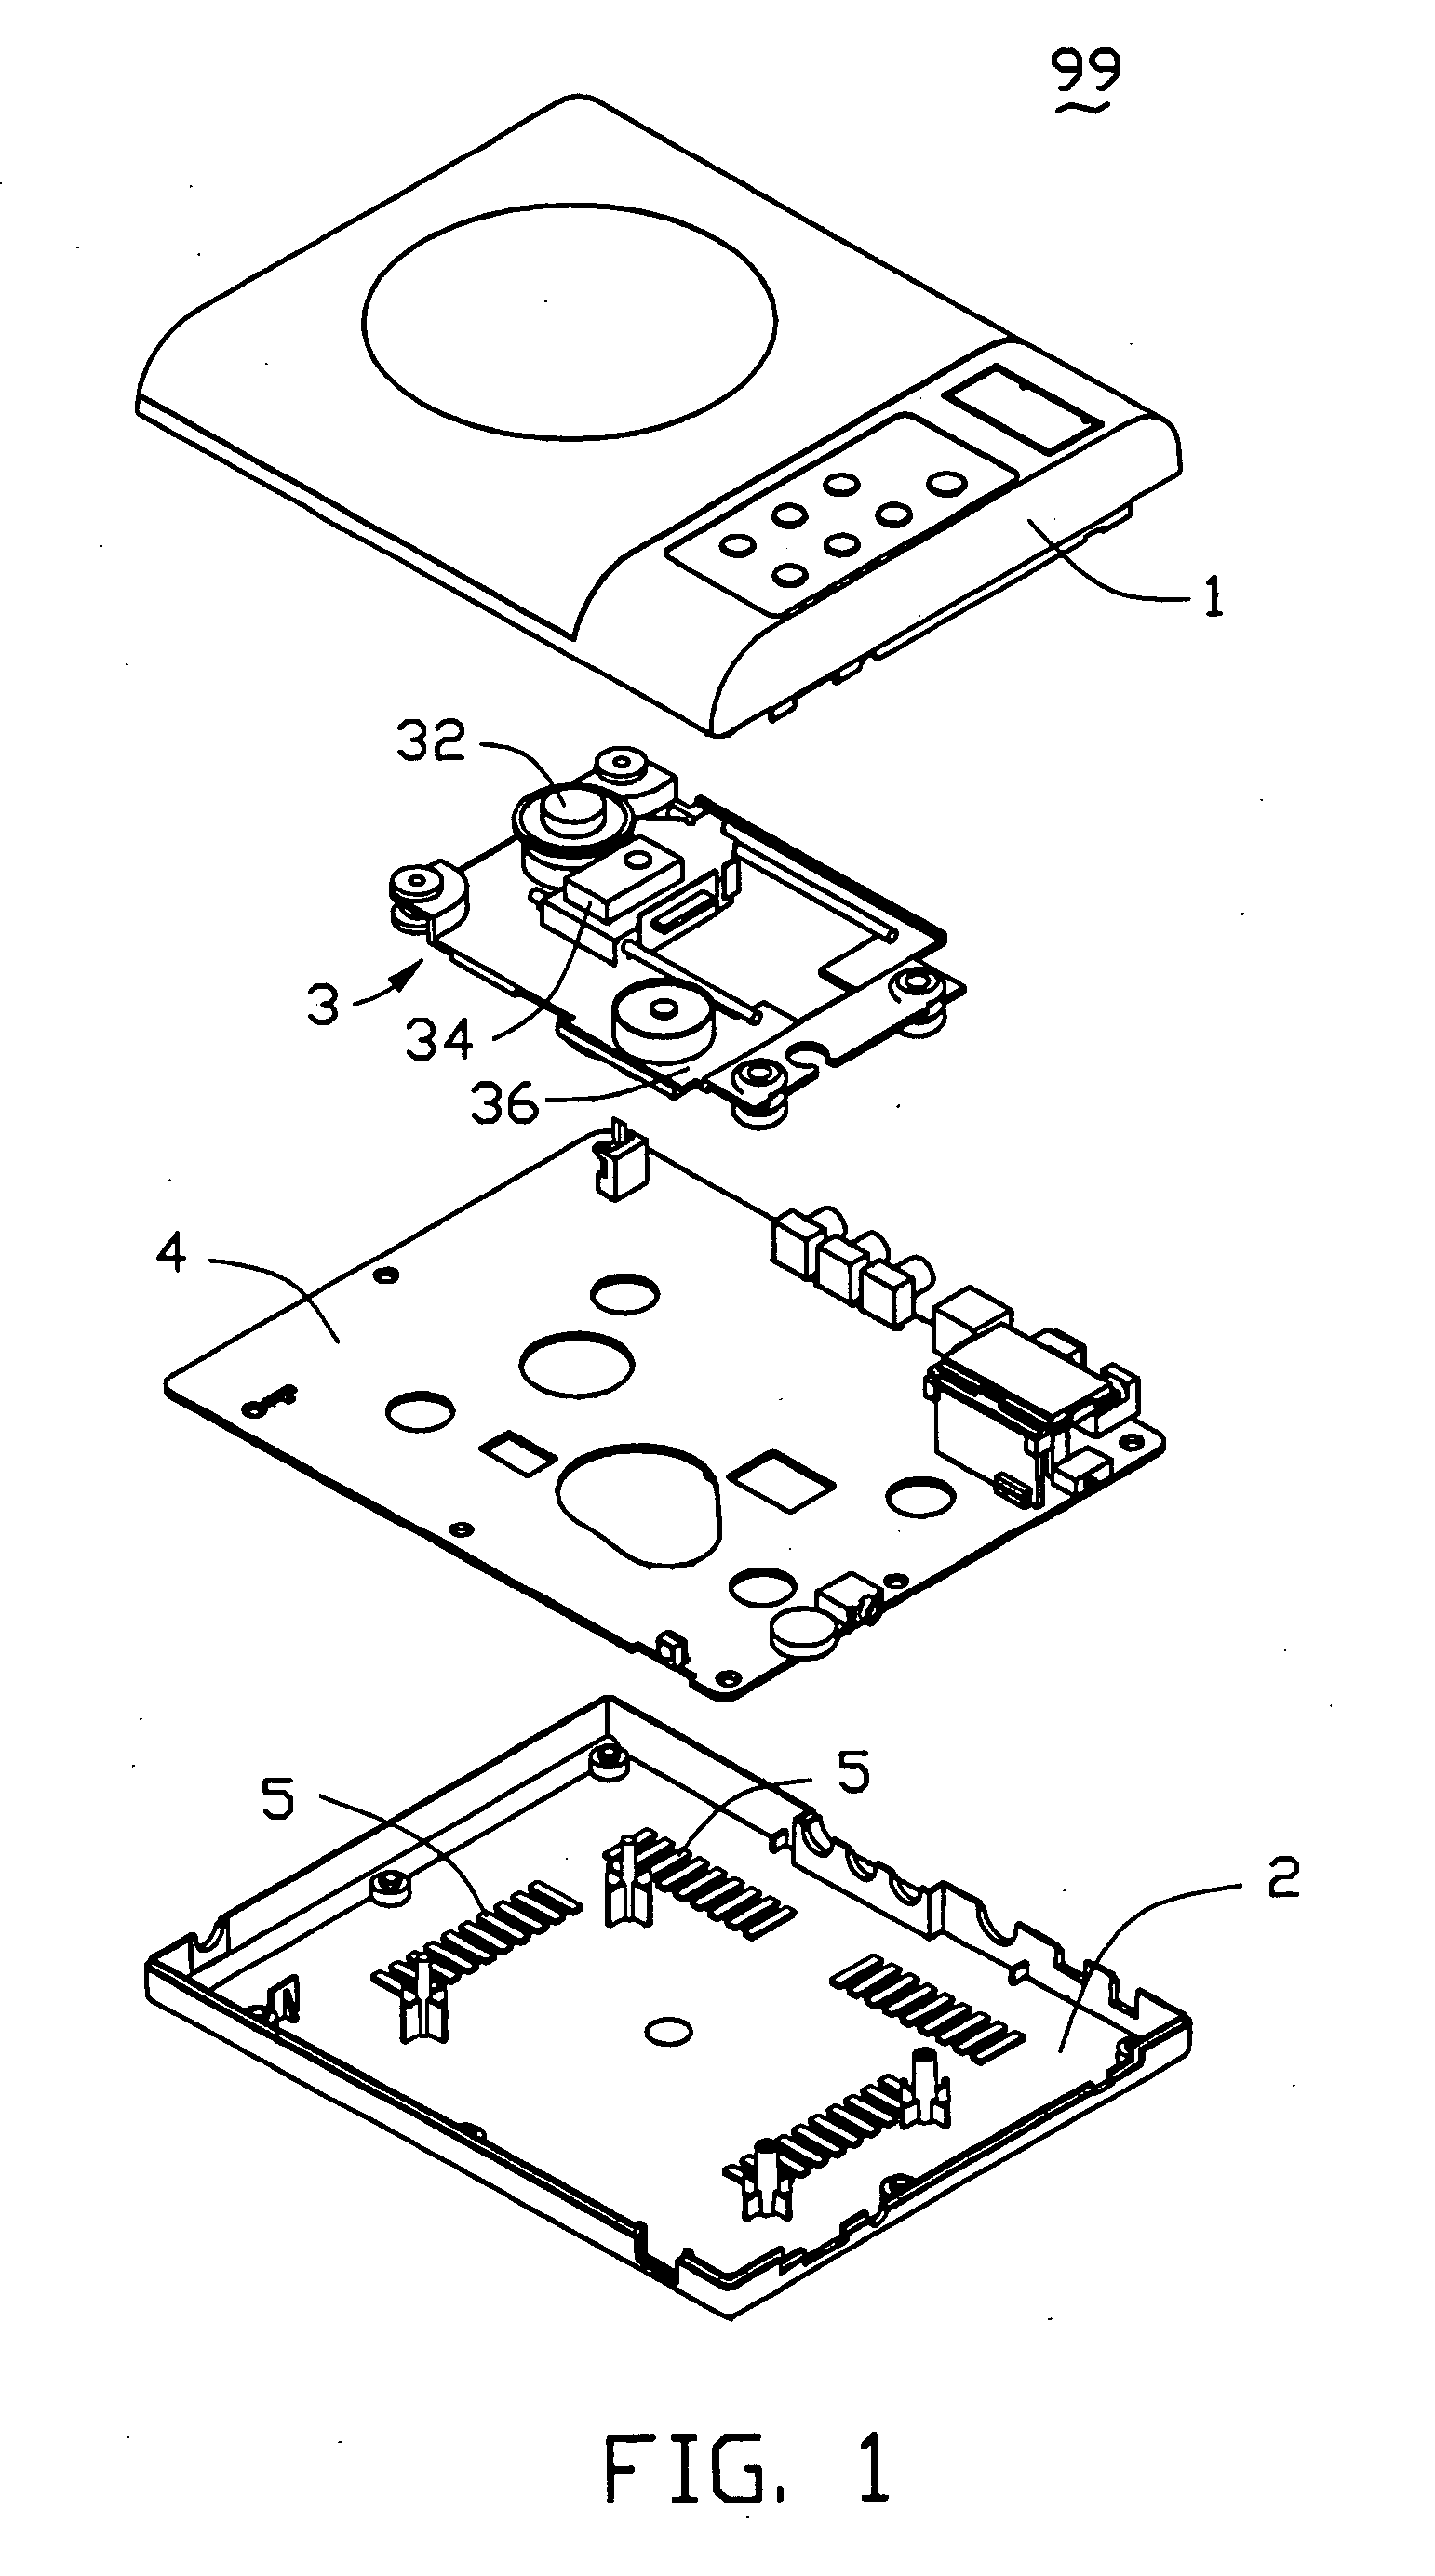 Optical recording/reproducing apparatus with dust resistant vents